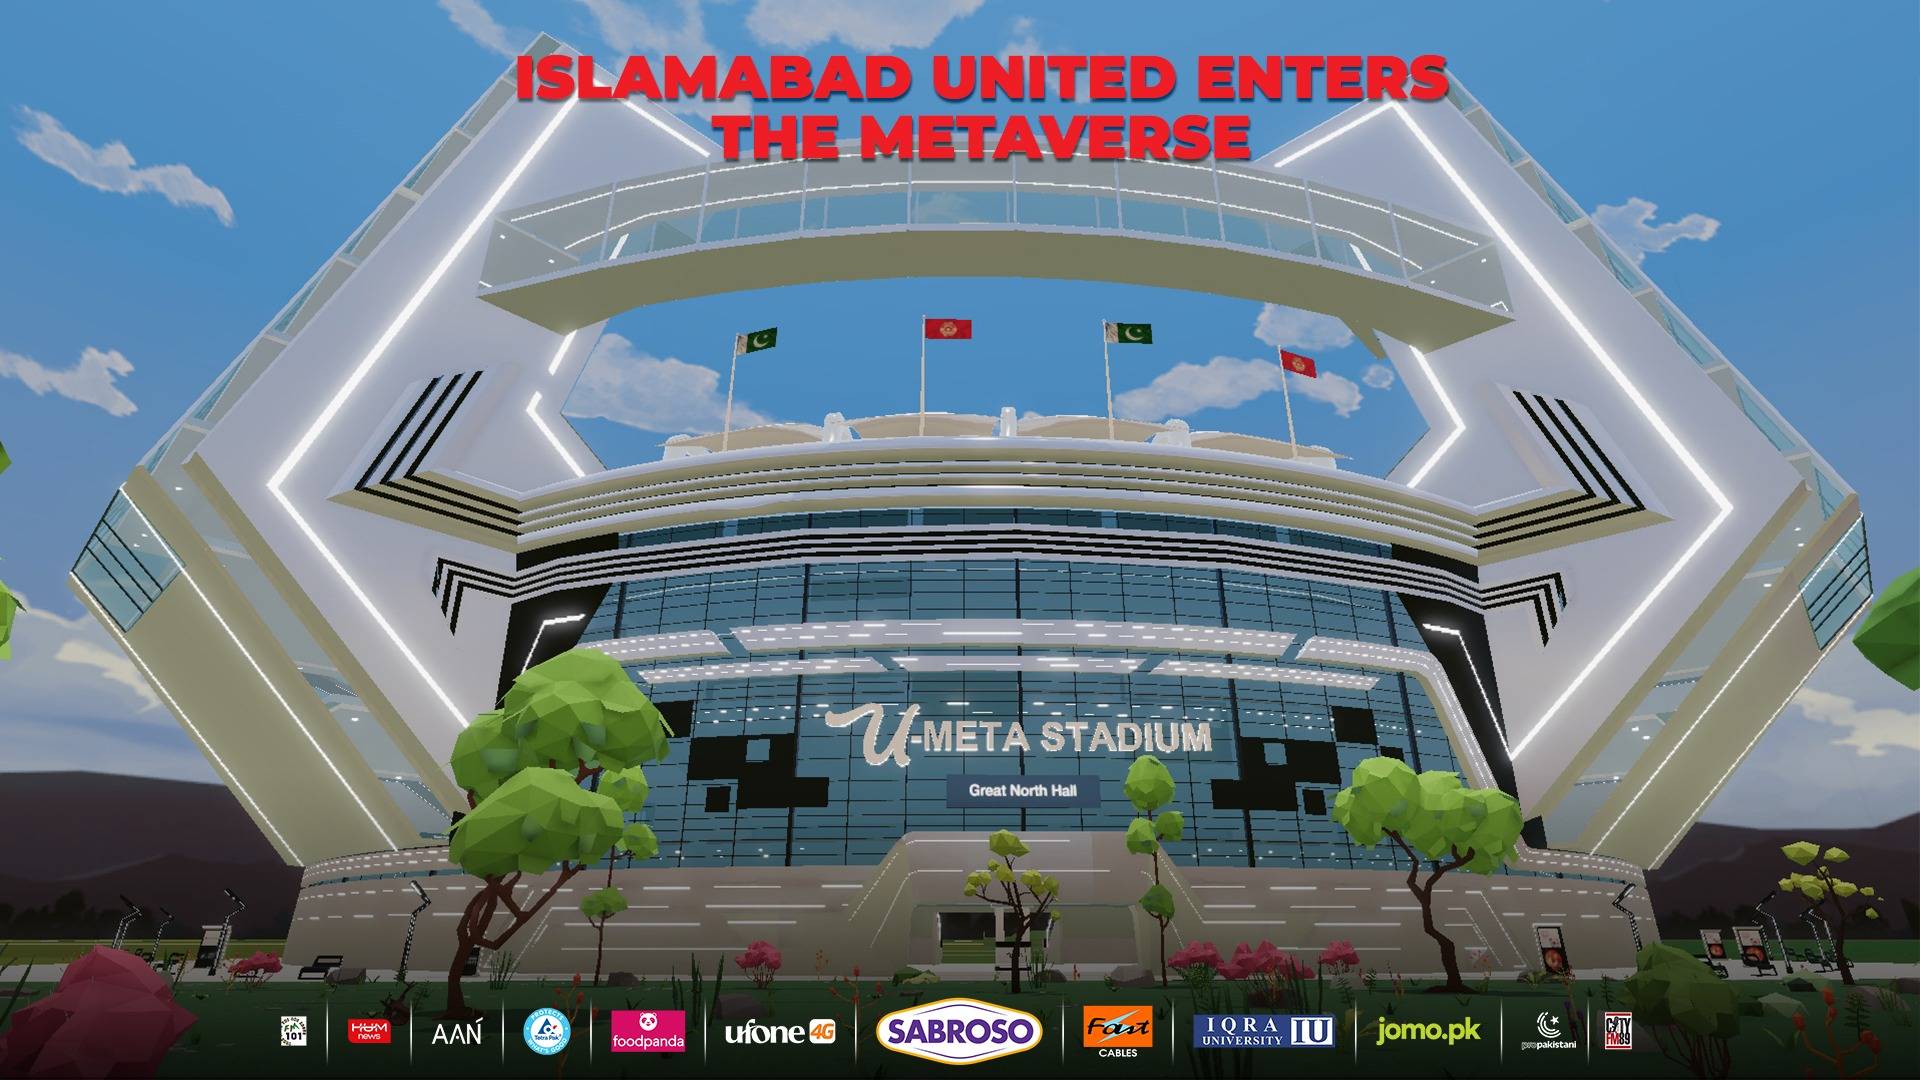 Islamabad United enters the Metaverse and offers the fans unprecedented experiences with free Digital Collectible Cards